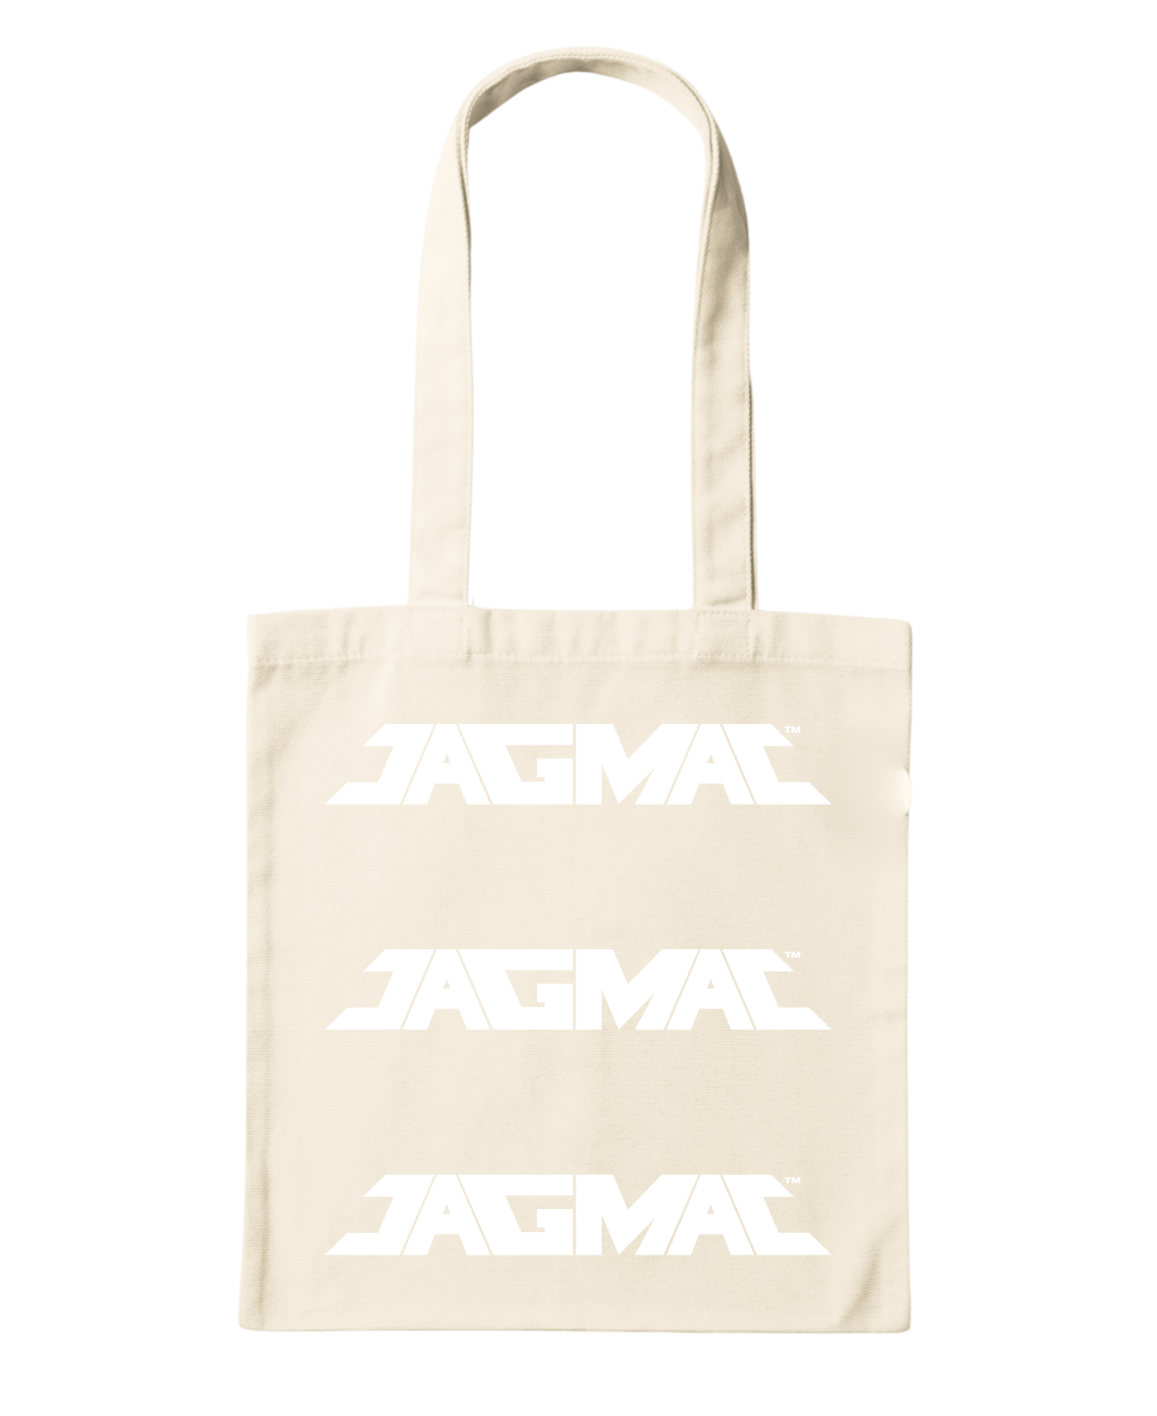 JAGMAC Ends of The Earth Tote Bag